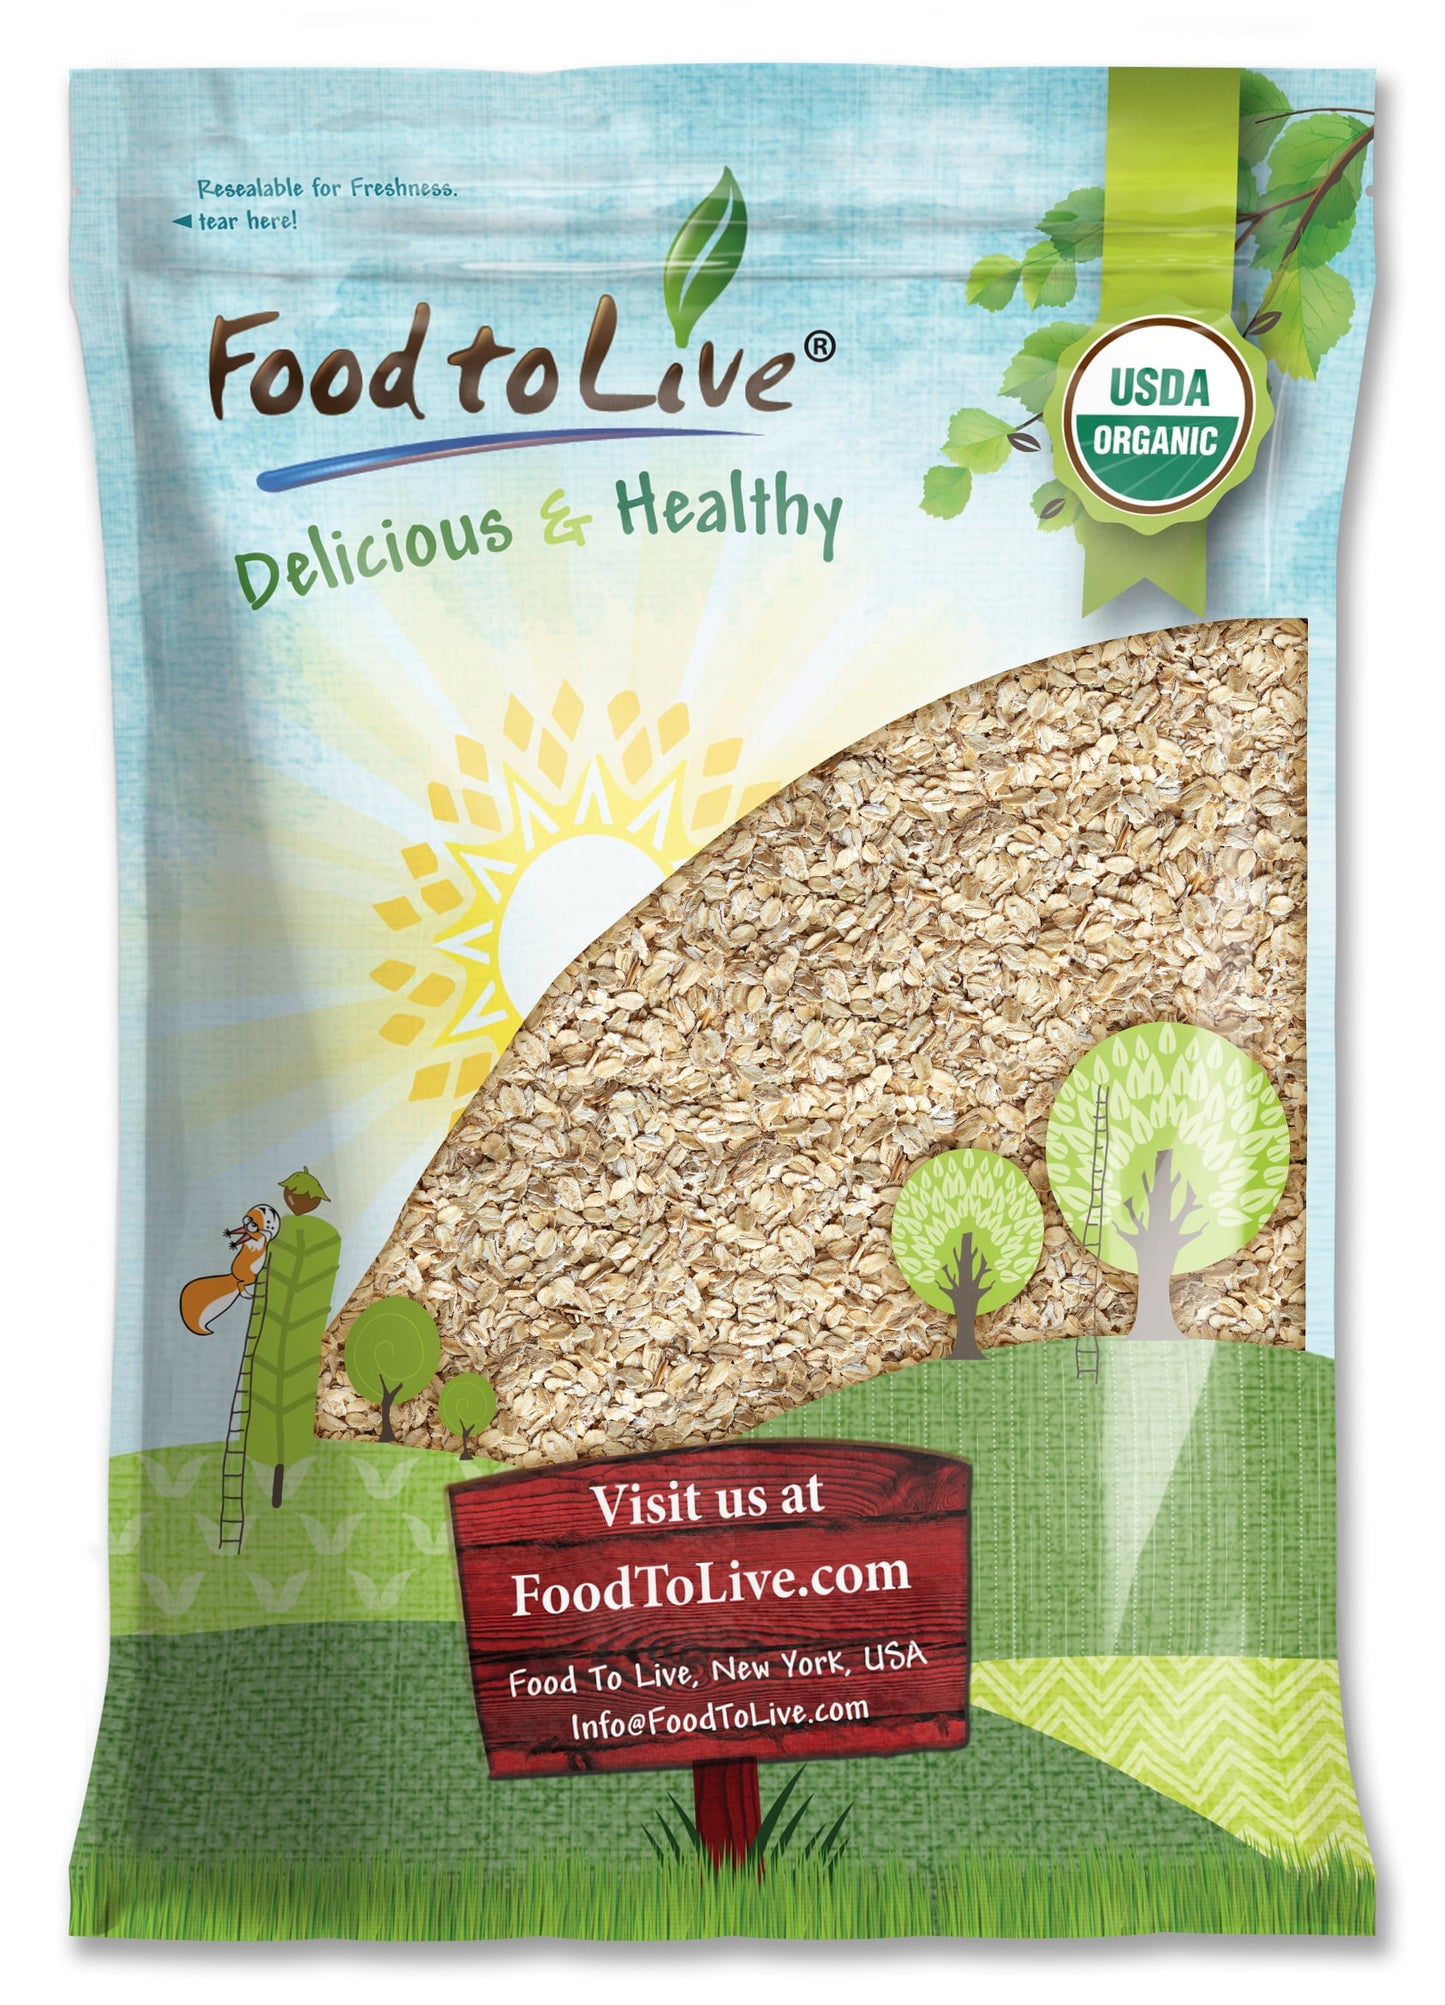 Organic Quick Cooking Rolled Oats – Non-GMO, 1-Minute Oatmeal, 100% Whole Grain, Thin Flakes, Uncooked, Vegan, Bulk. Rich in Protein, Fiber. Great for Breakfast Cereal, Granola, Baking